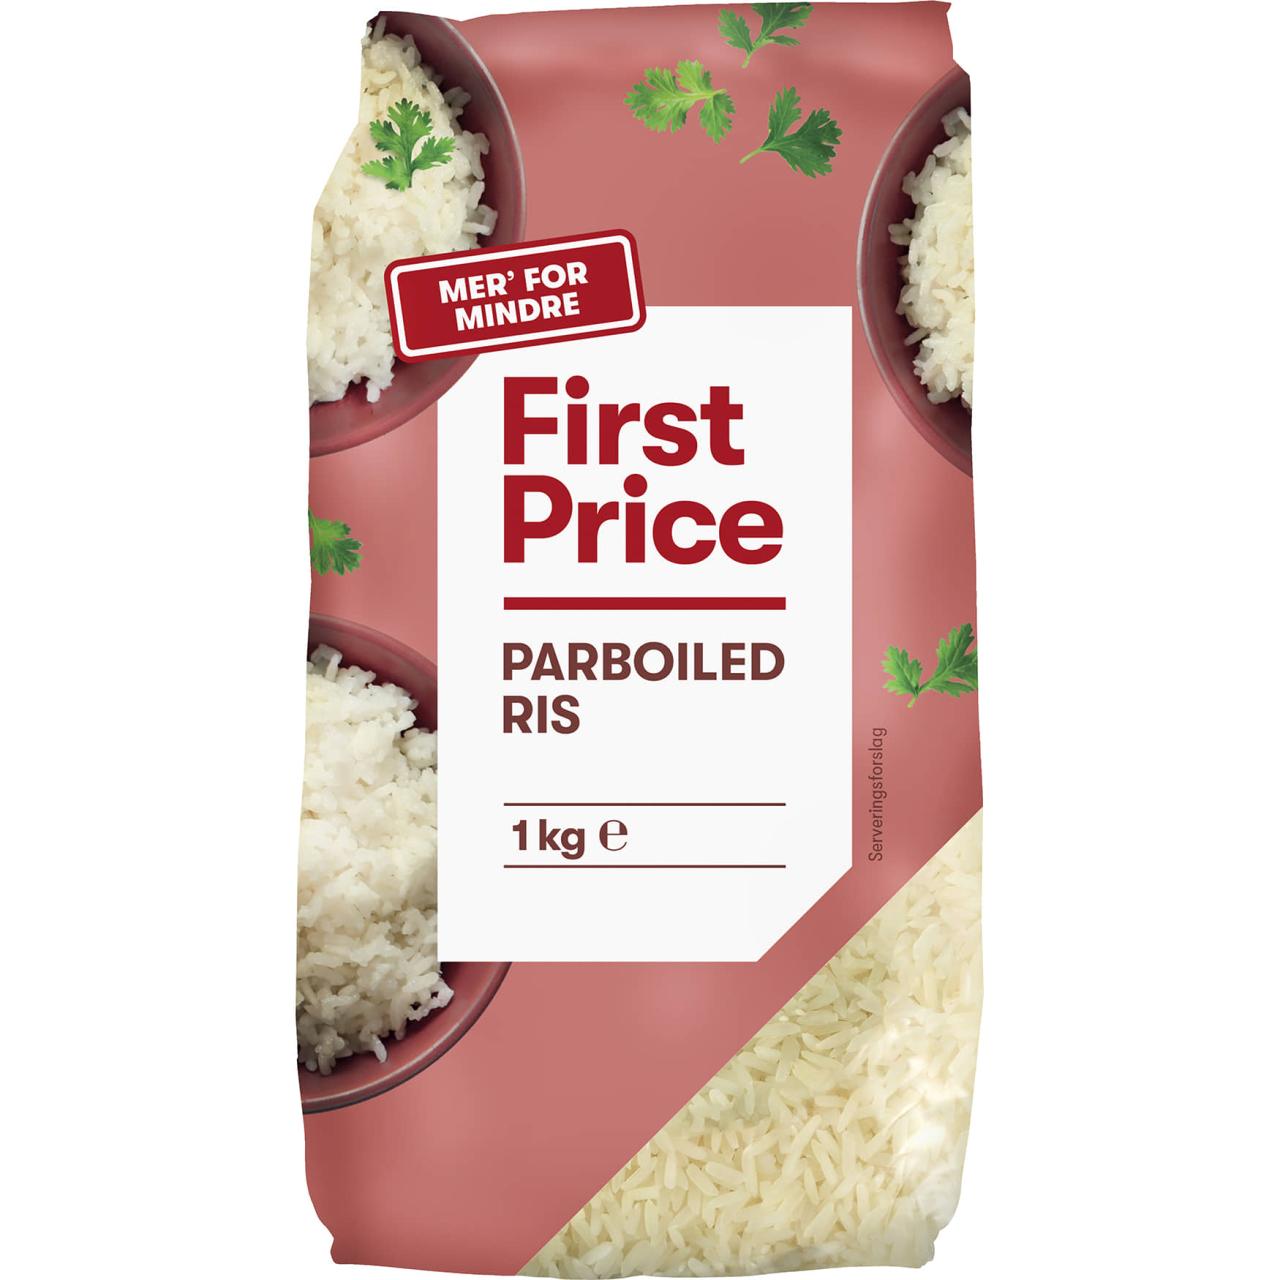 First Price Parboiled Ris 1kg